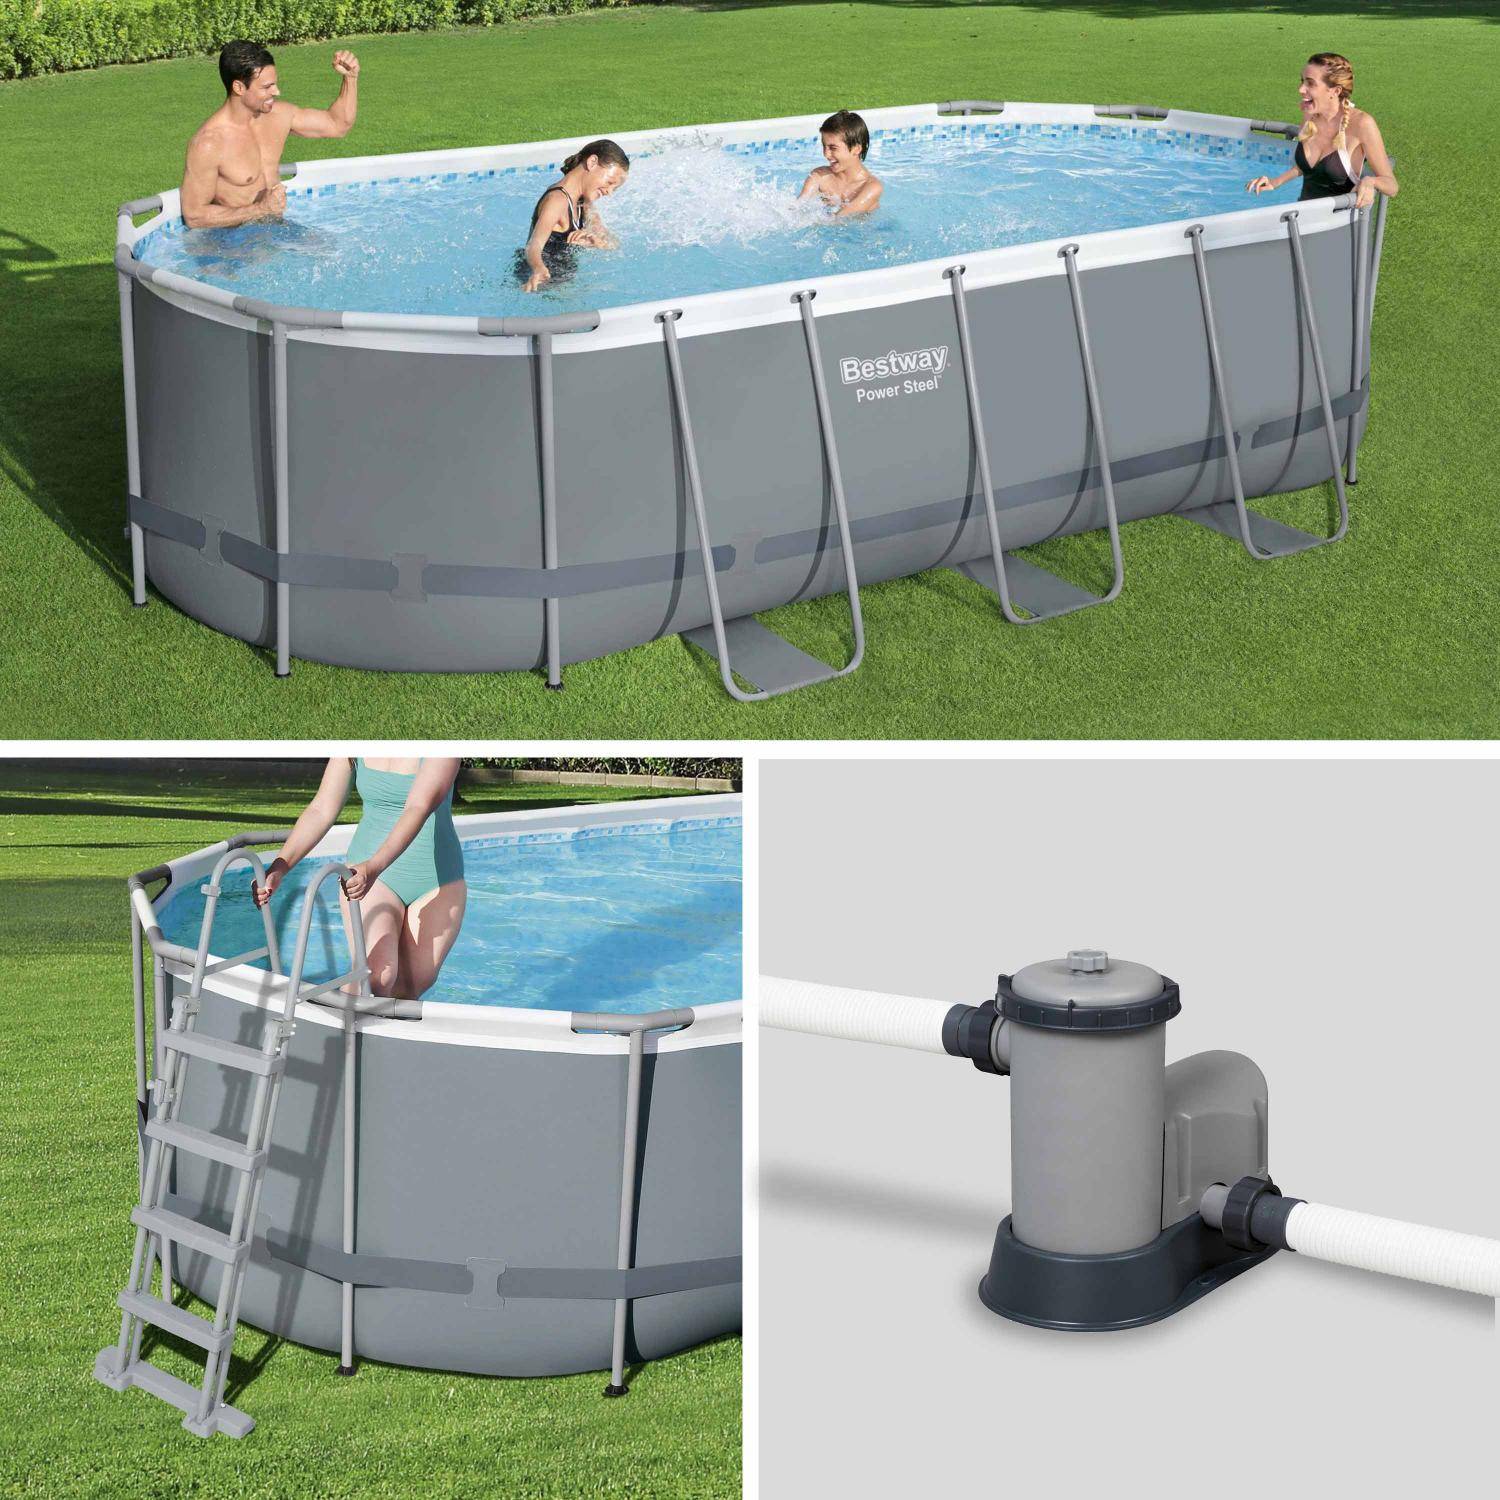 5x3m above ground tubular swimming pool, grey, rectangular, with pump, filter cartridge, diffuser, cover and ladder - Bestway Spinelle - Grey Photo4